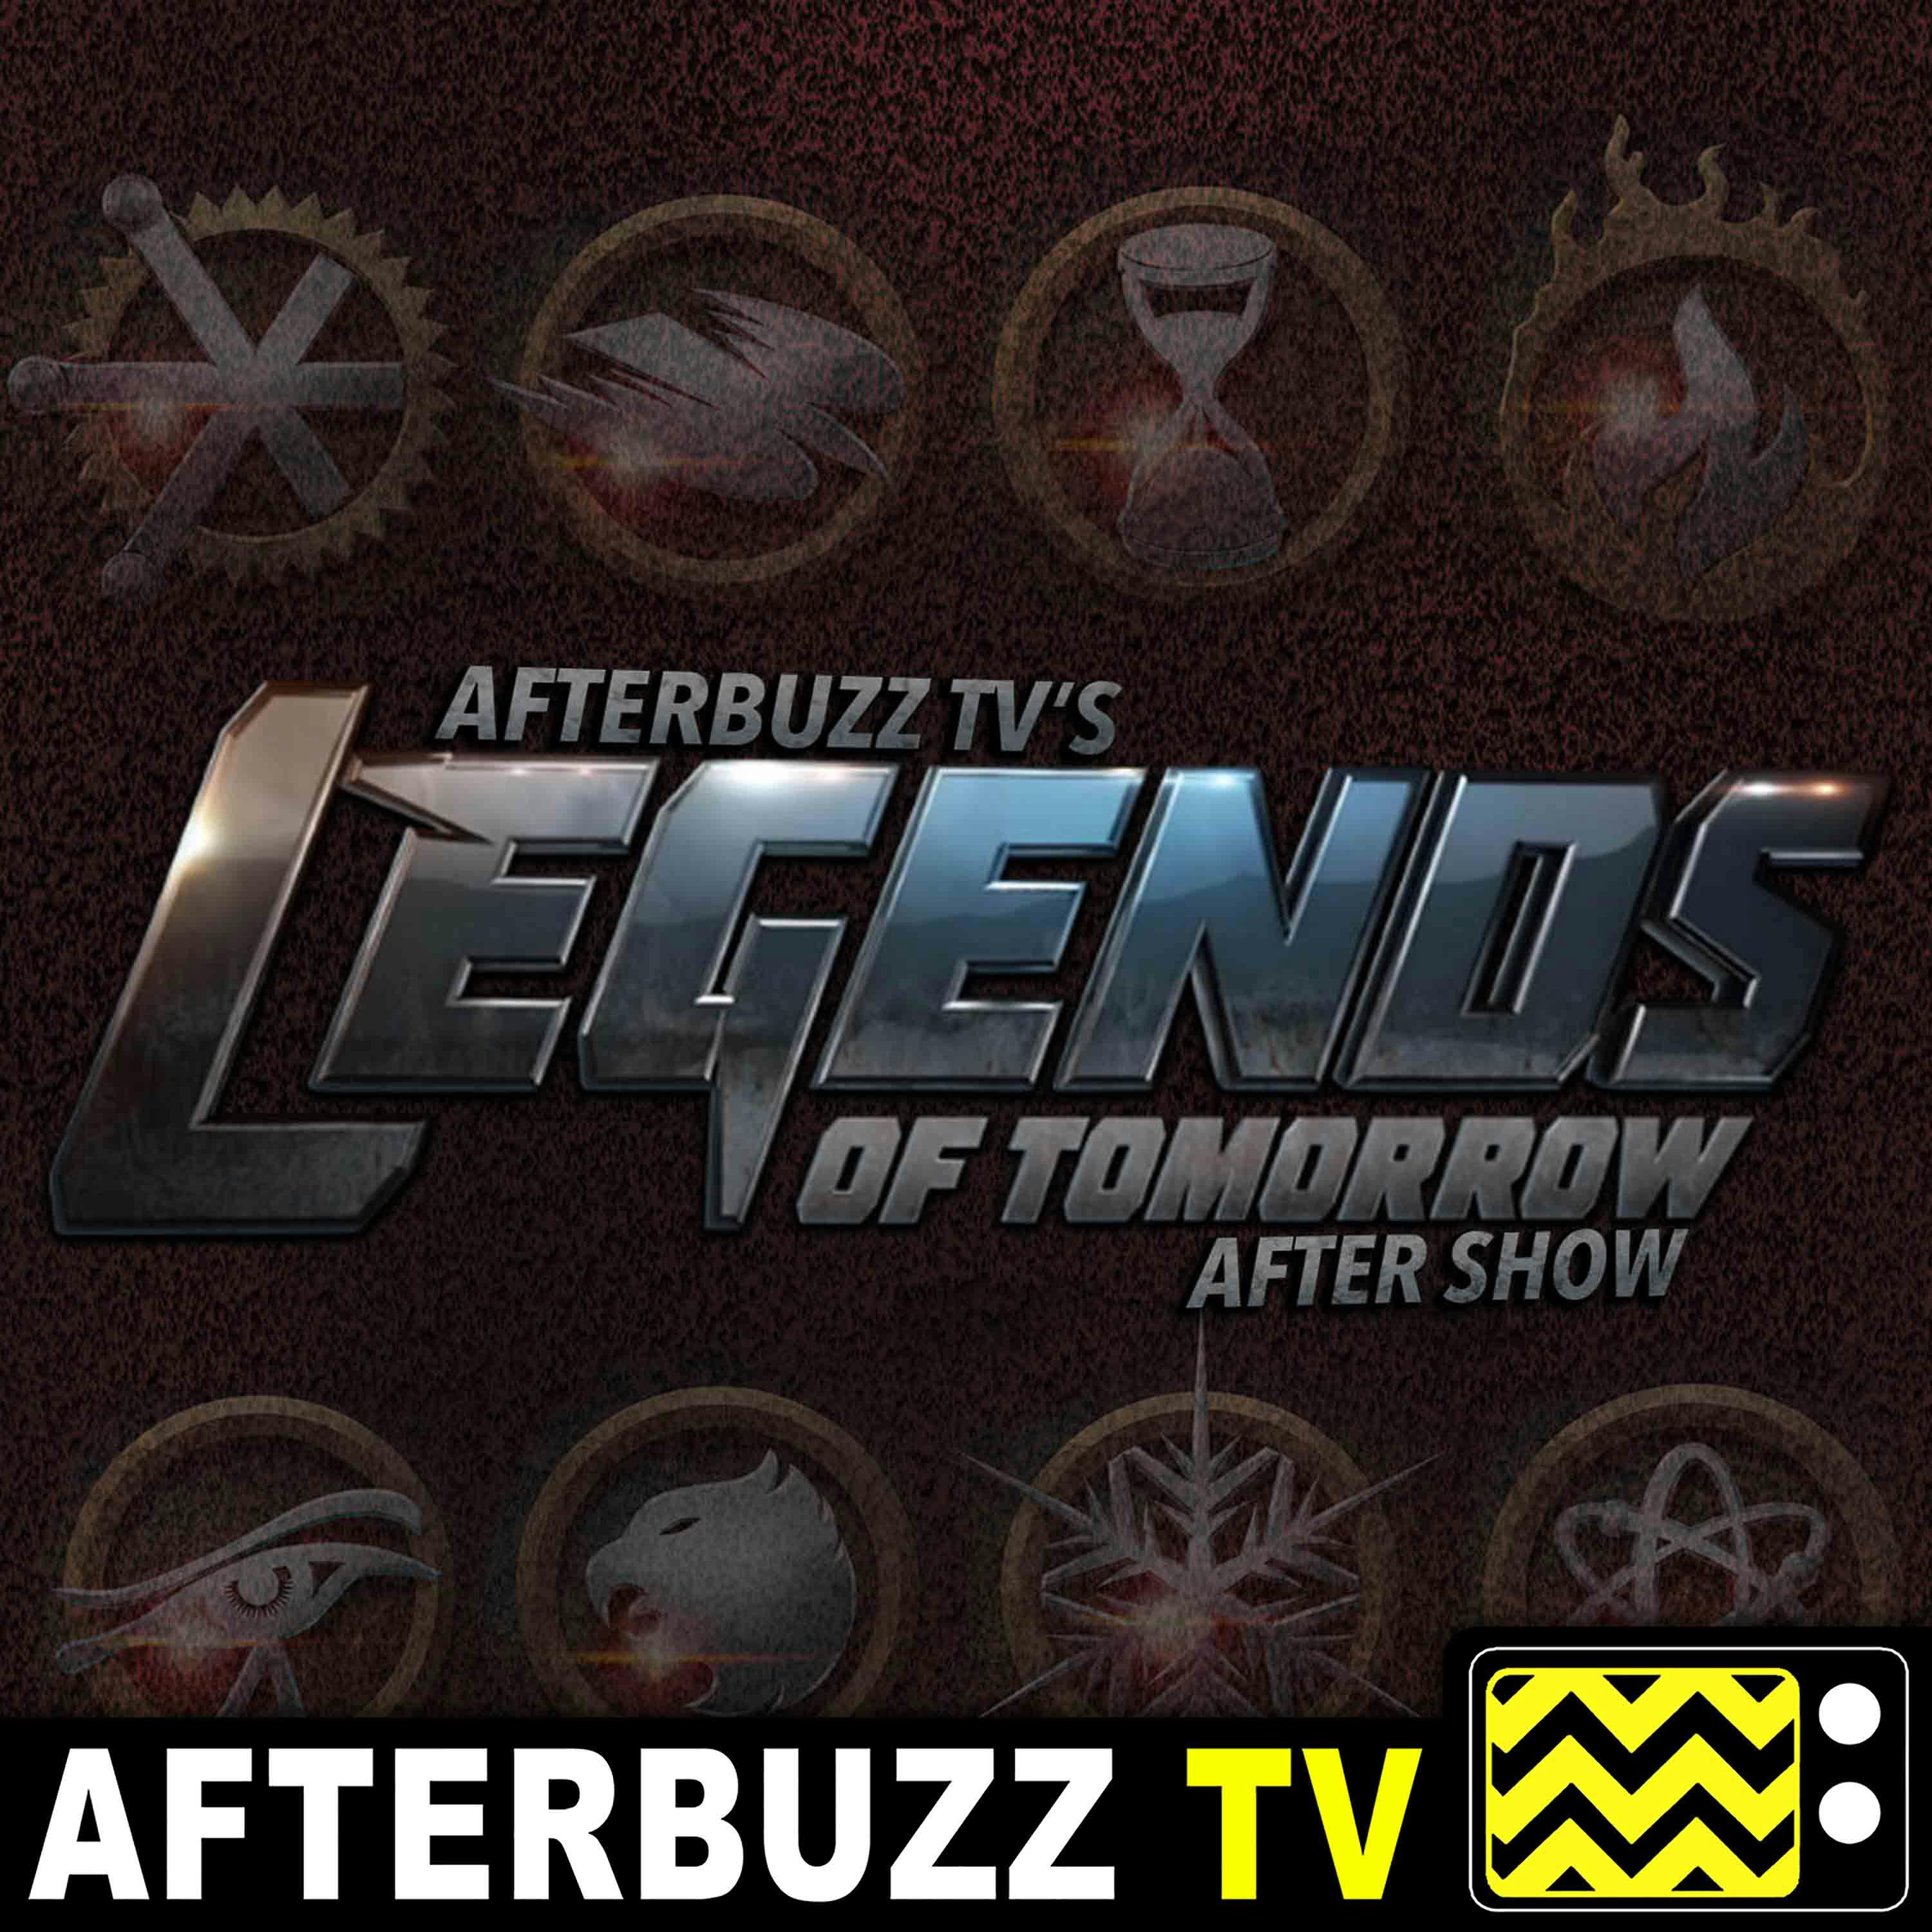 Legends Of Tomorrow S:3 | Beebo the God of War E:9 | AfterBuzz TV AfterShow